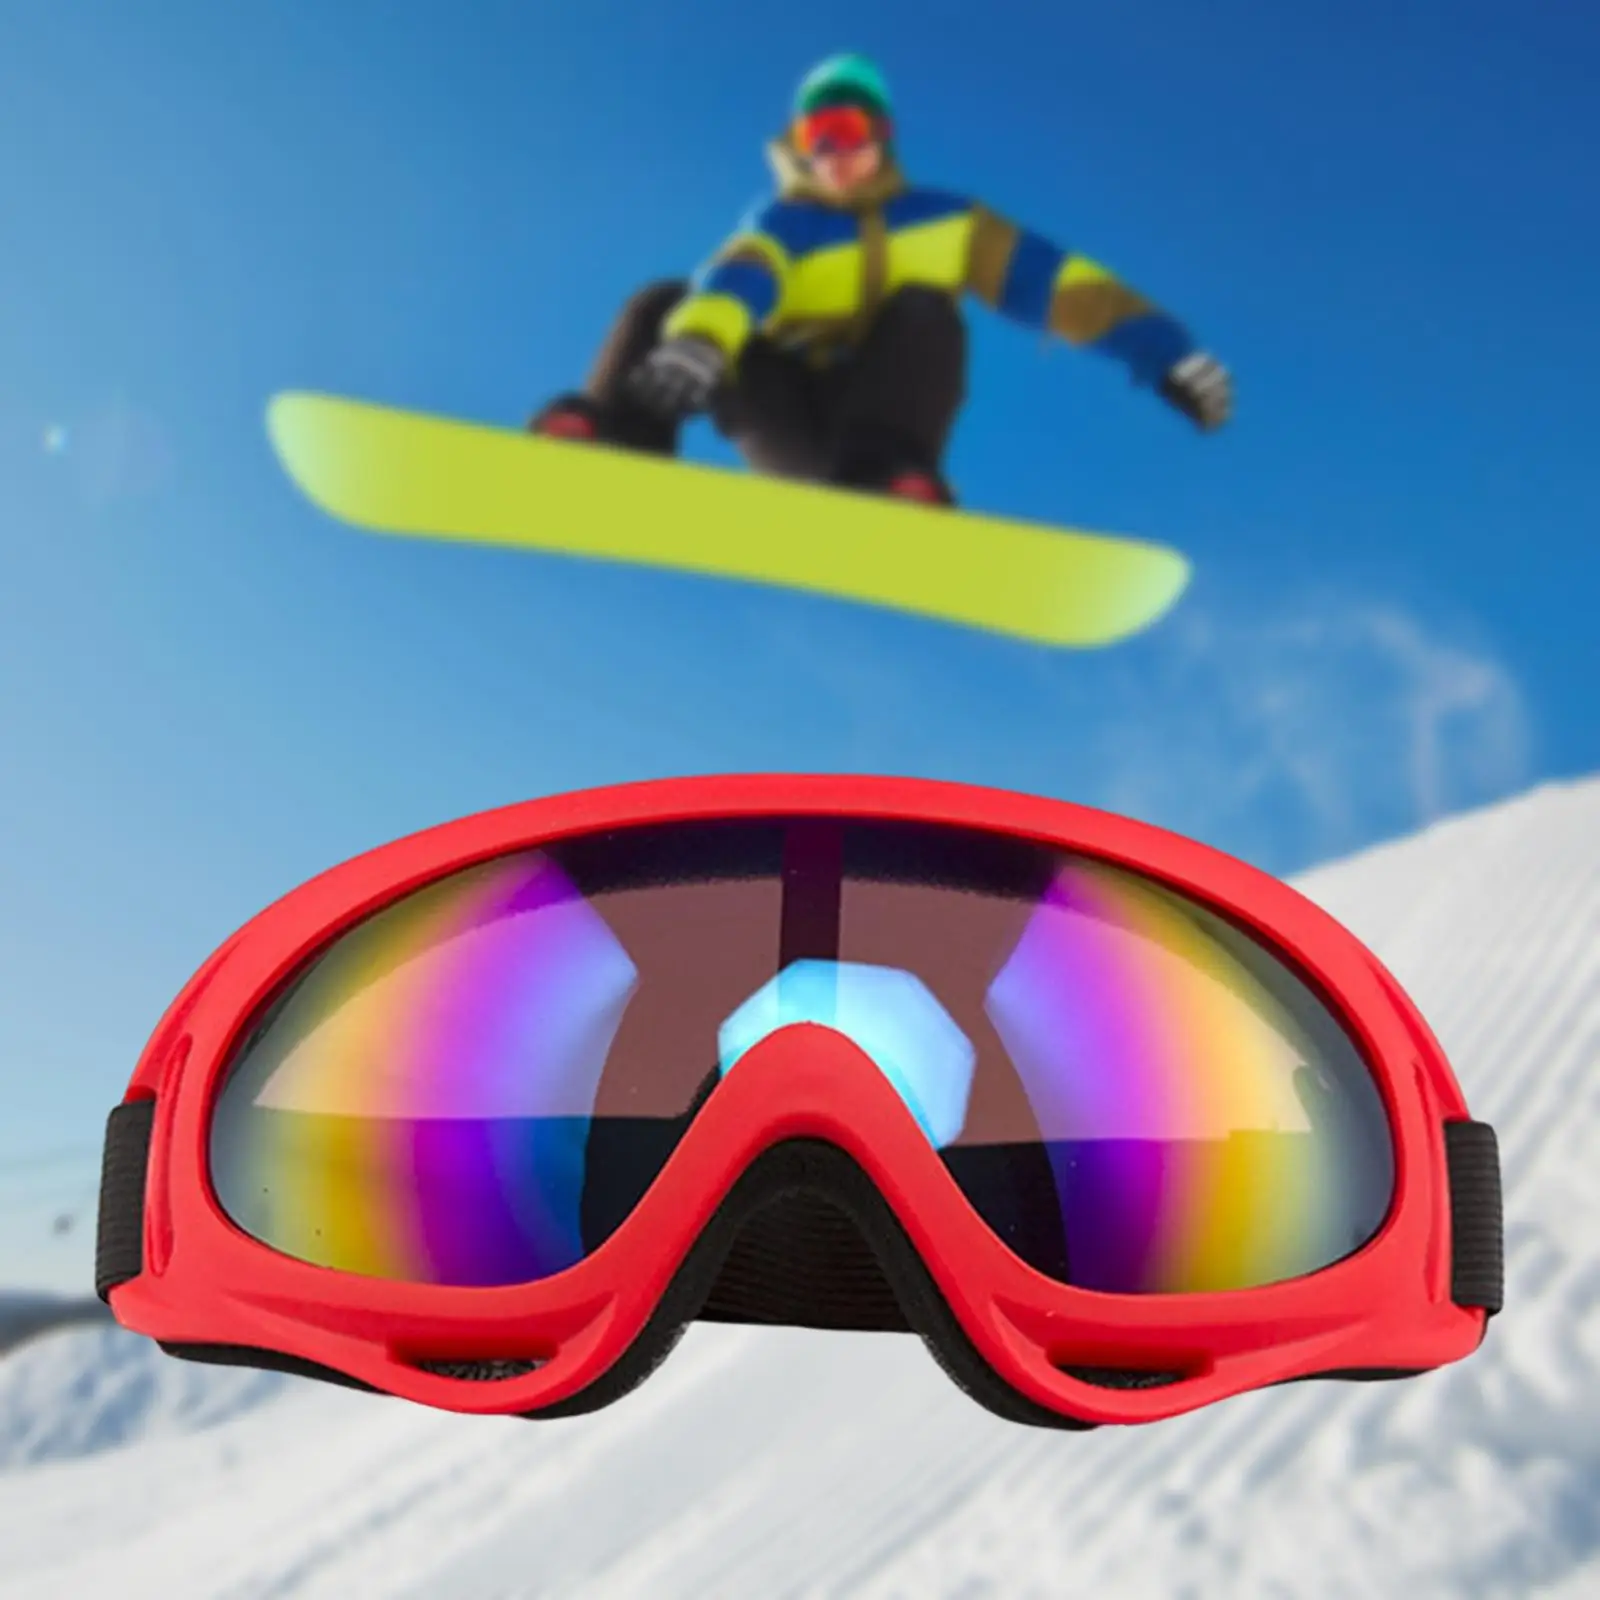 Outdoor Sports Ski Goggles with Adjustable Strap Anti Fog for Skiing Riding